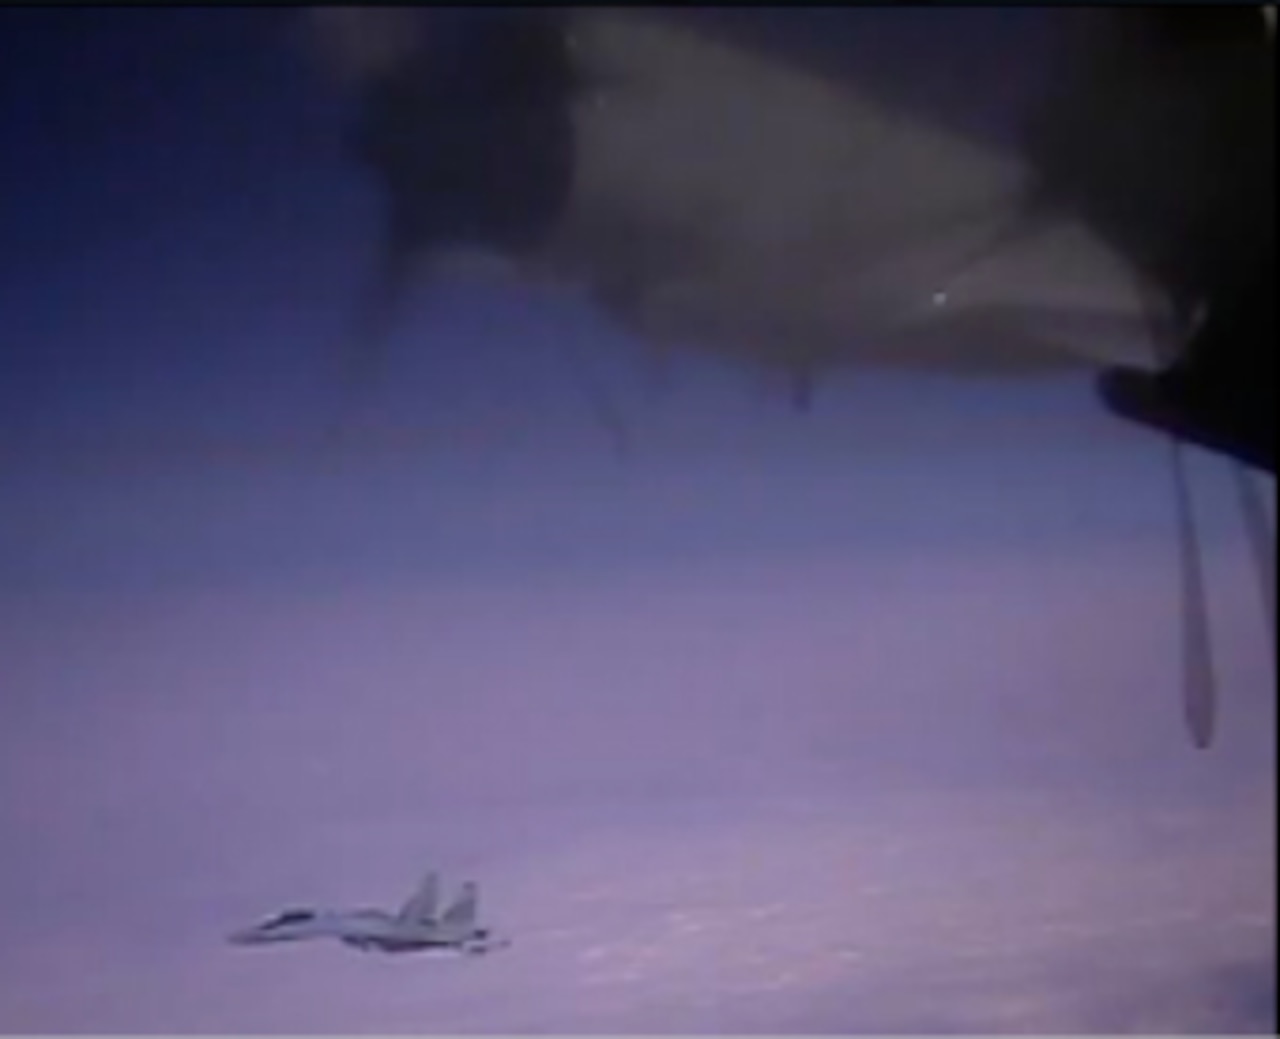 A jet flies near another, partly visible in foreground.